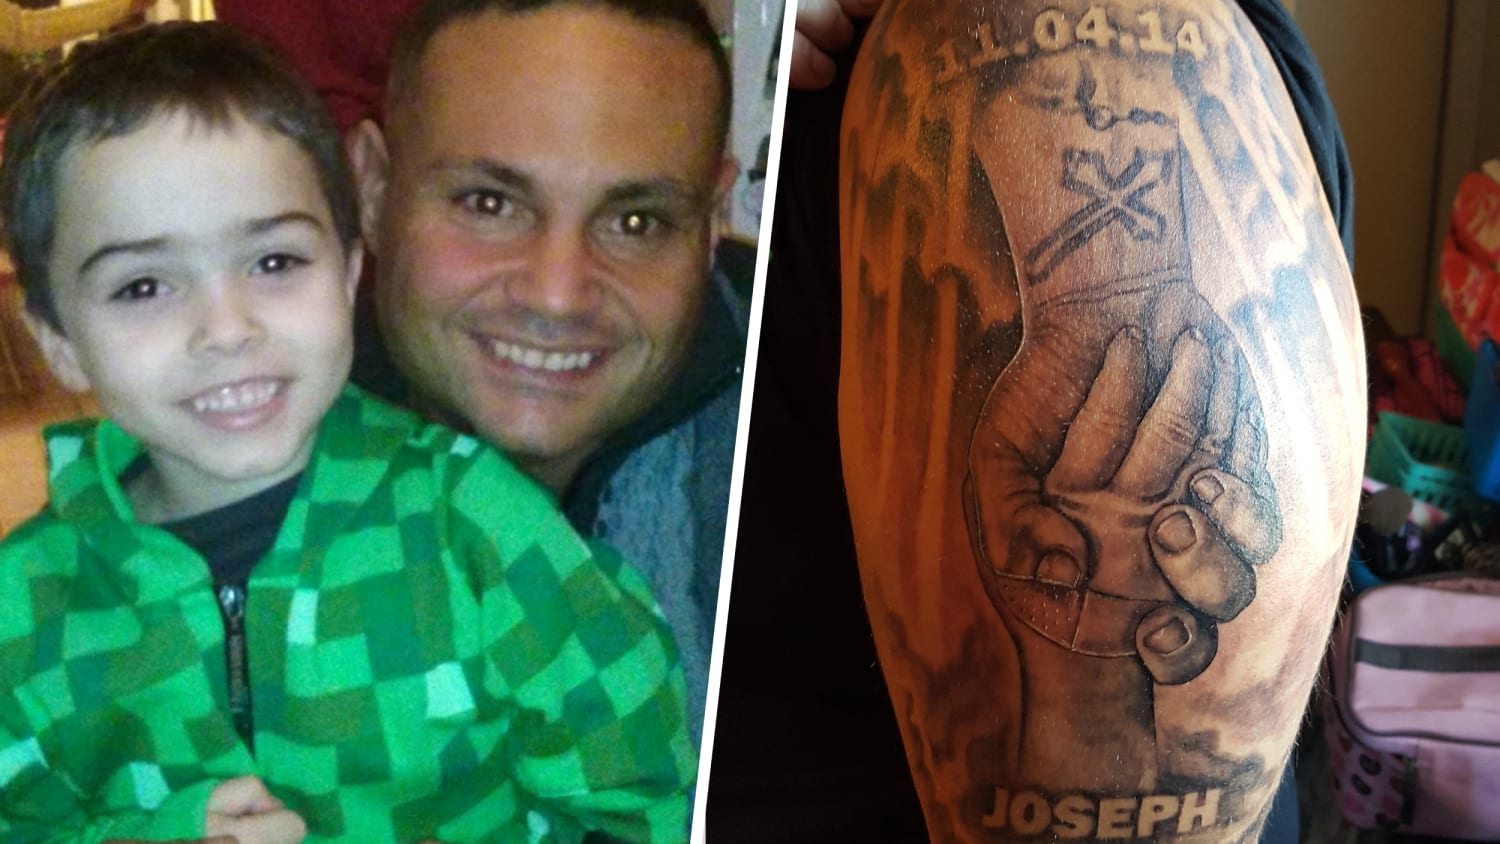 Dad gets touching tribute tattoo after son's death